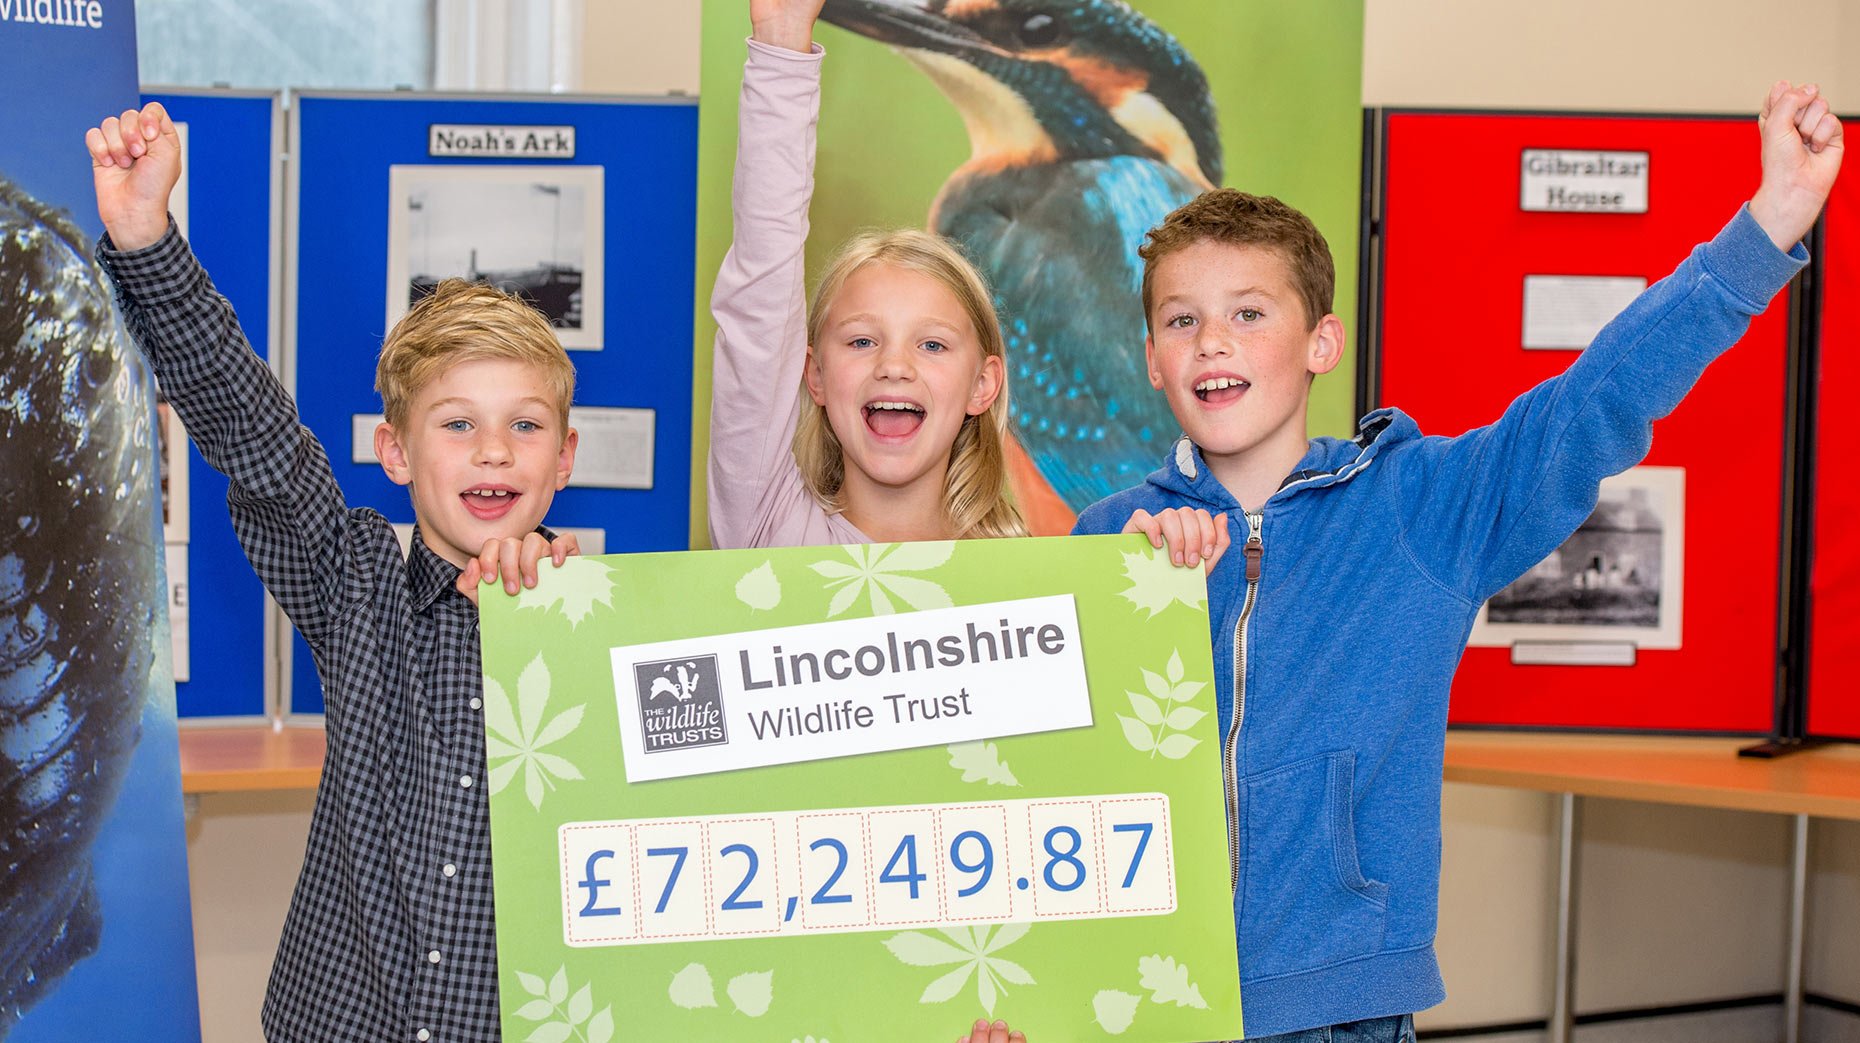 (L-R) Youngsters at Gibraltar Point Nature Reserve celebrate the £72,249 donation to the Lincolnshire Wildlife Trust. From left, George Wilson age 8, Rhianna Wilson age 10 and Jack Eastwell age 9.